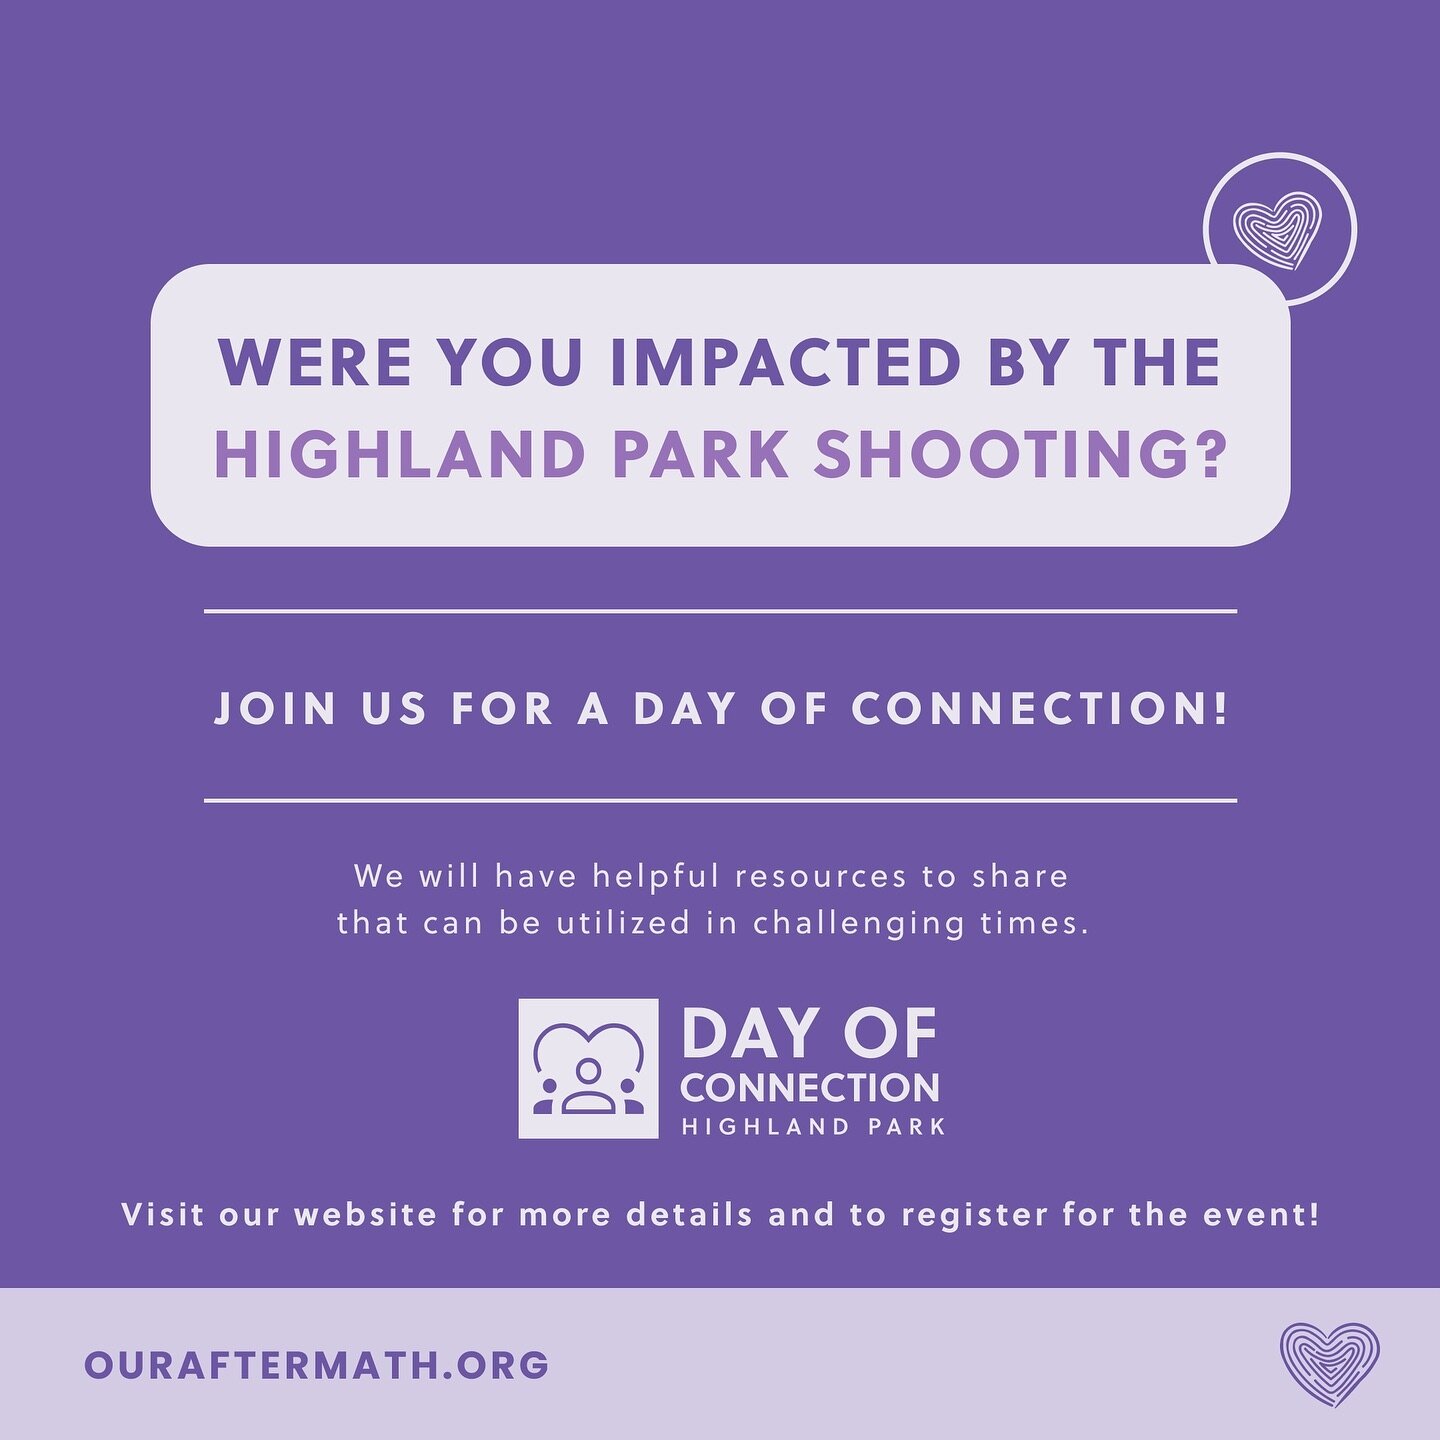 We have a Day of Connection coming up for those who were impacted by the Highland Park shooting. Visit our website for more details. 

Link in bio.
#ouraftermath #massshootingsurvivor #highlandpark #highlandparkil